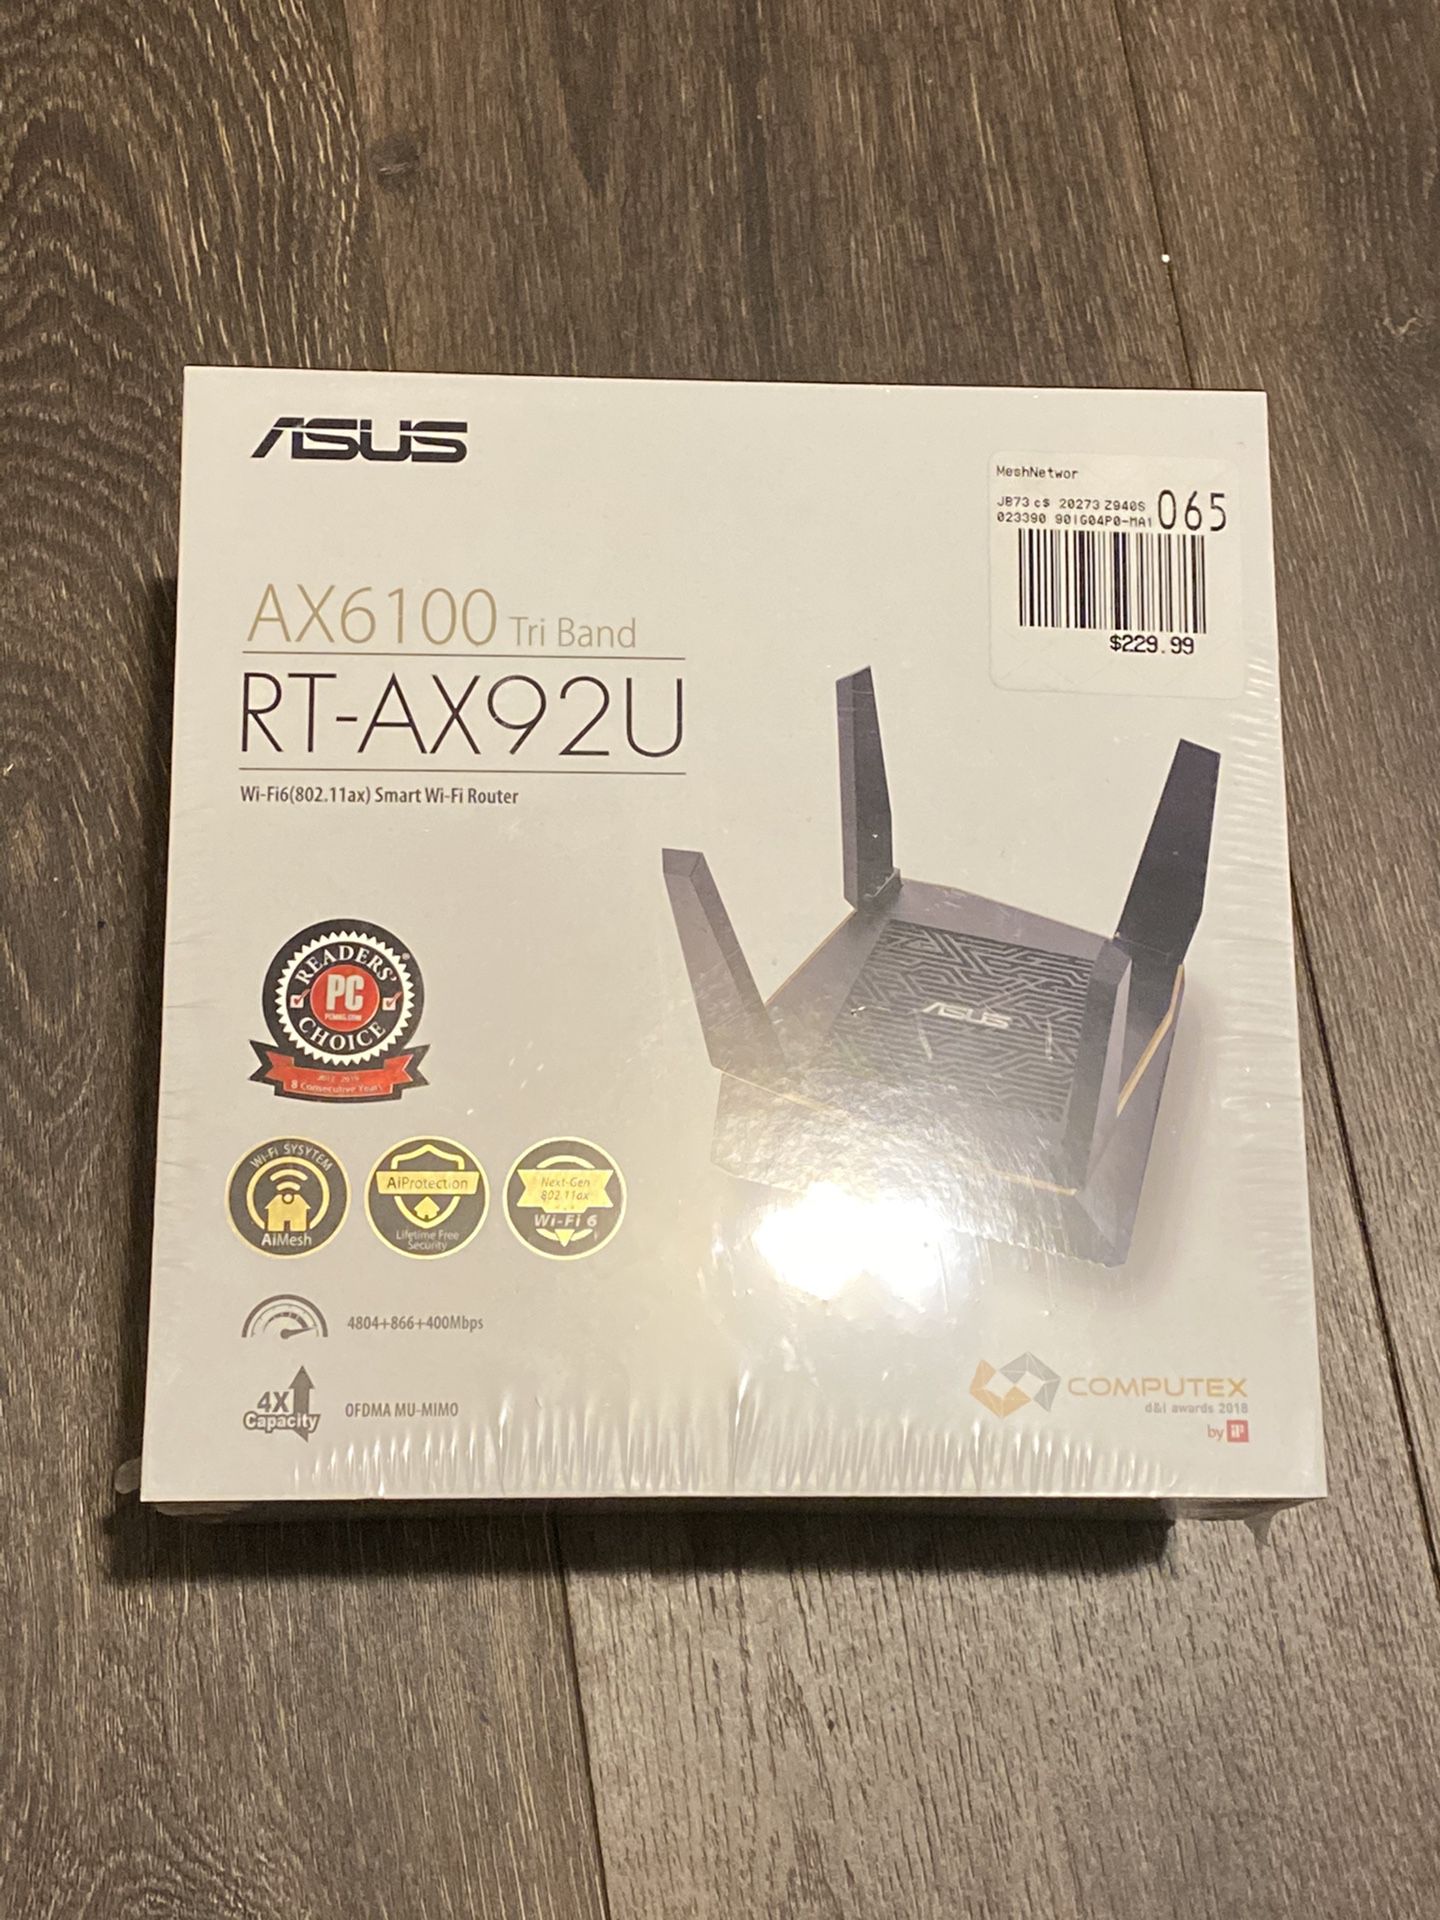 ASUS AX6100 smart WiFi router